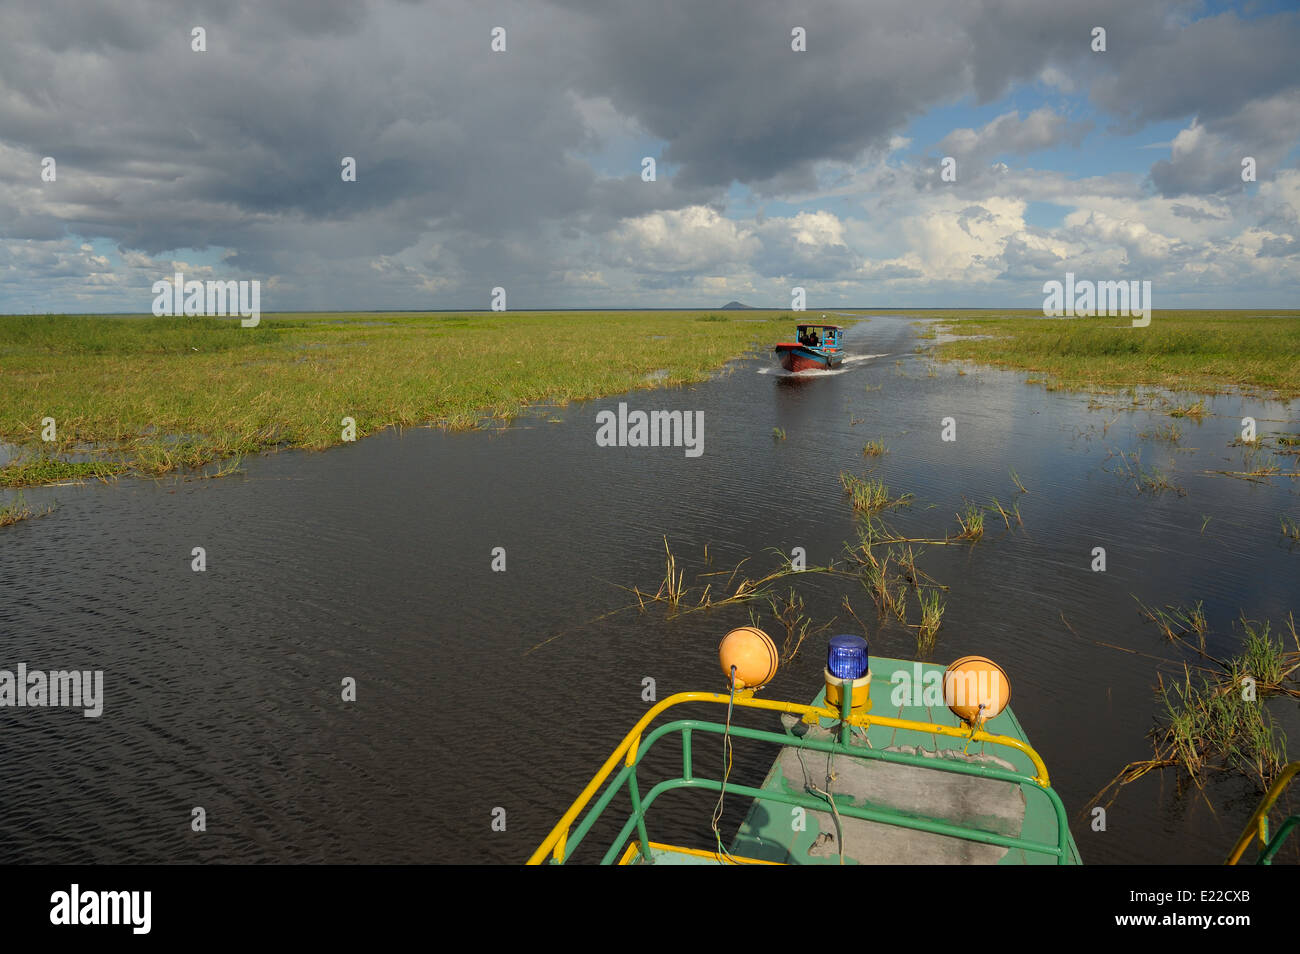 Boat crossing on the Tonle Sap Lake Stock Photo